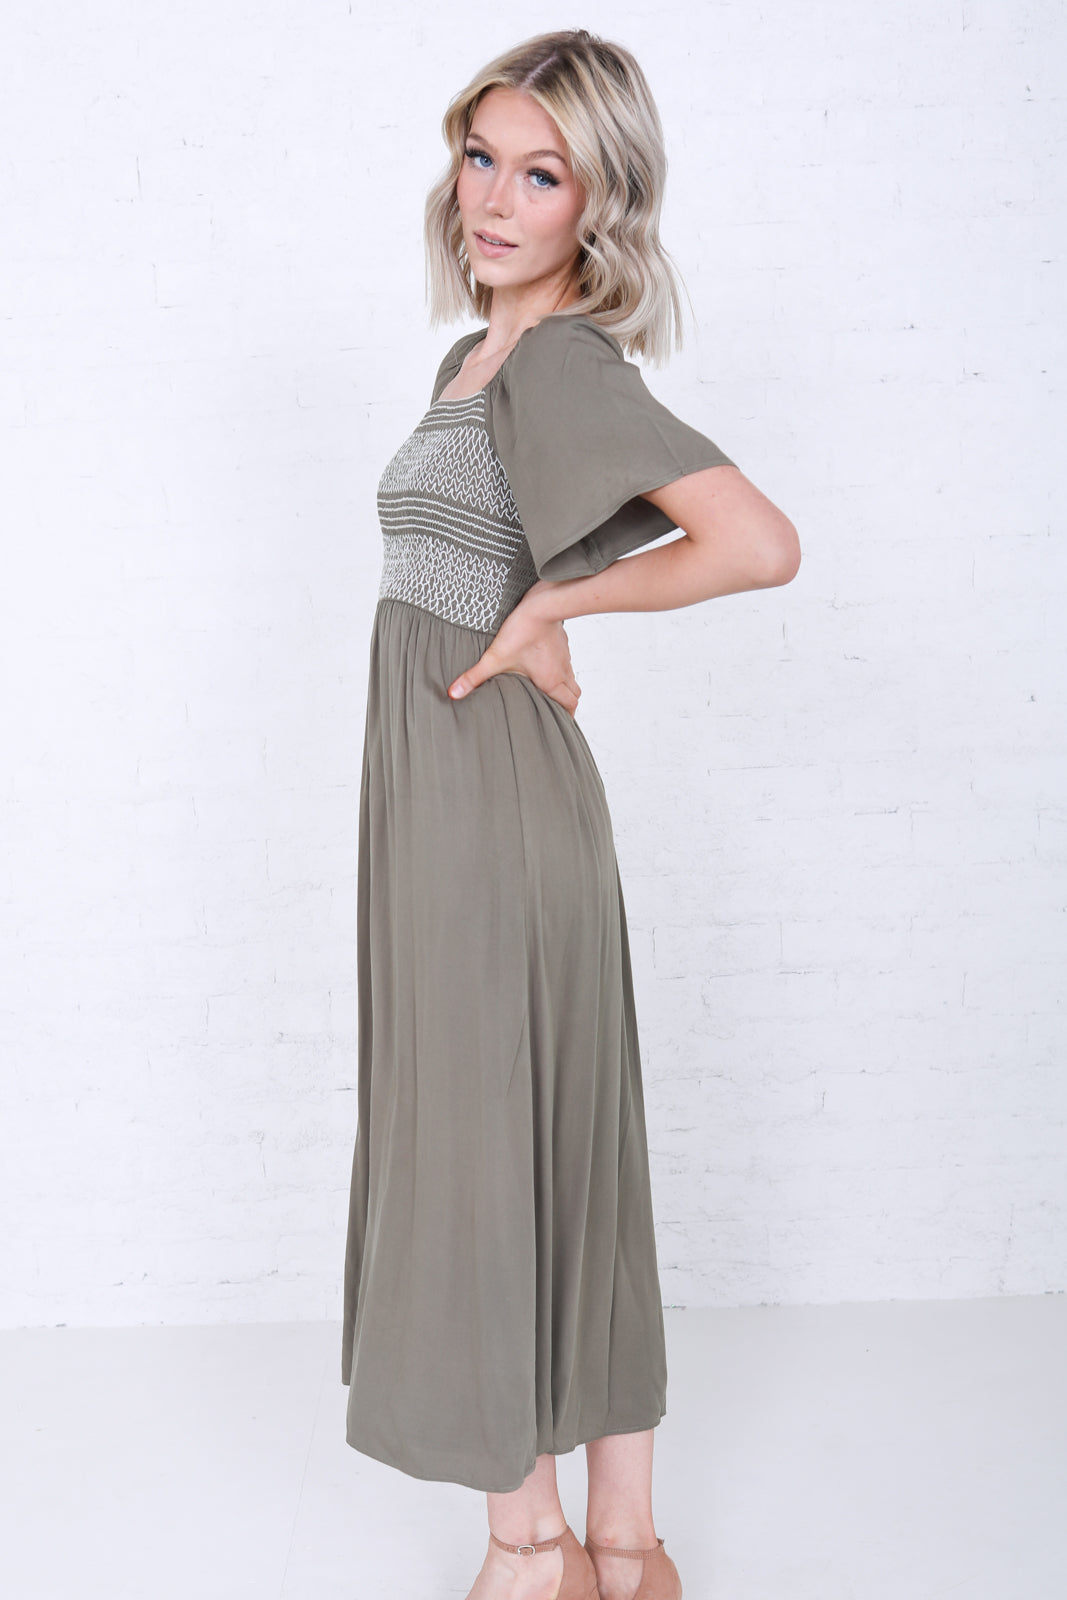 THE CELESTE IN DUSTY OLIVE EMBROIDERY FINAL SALE